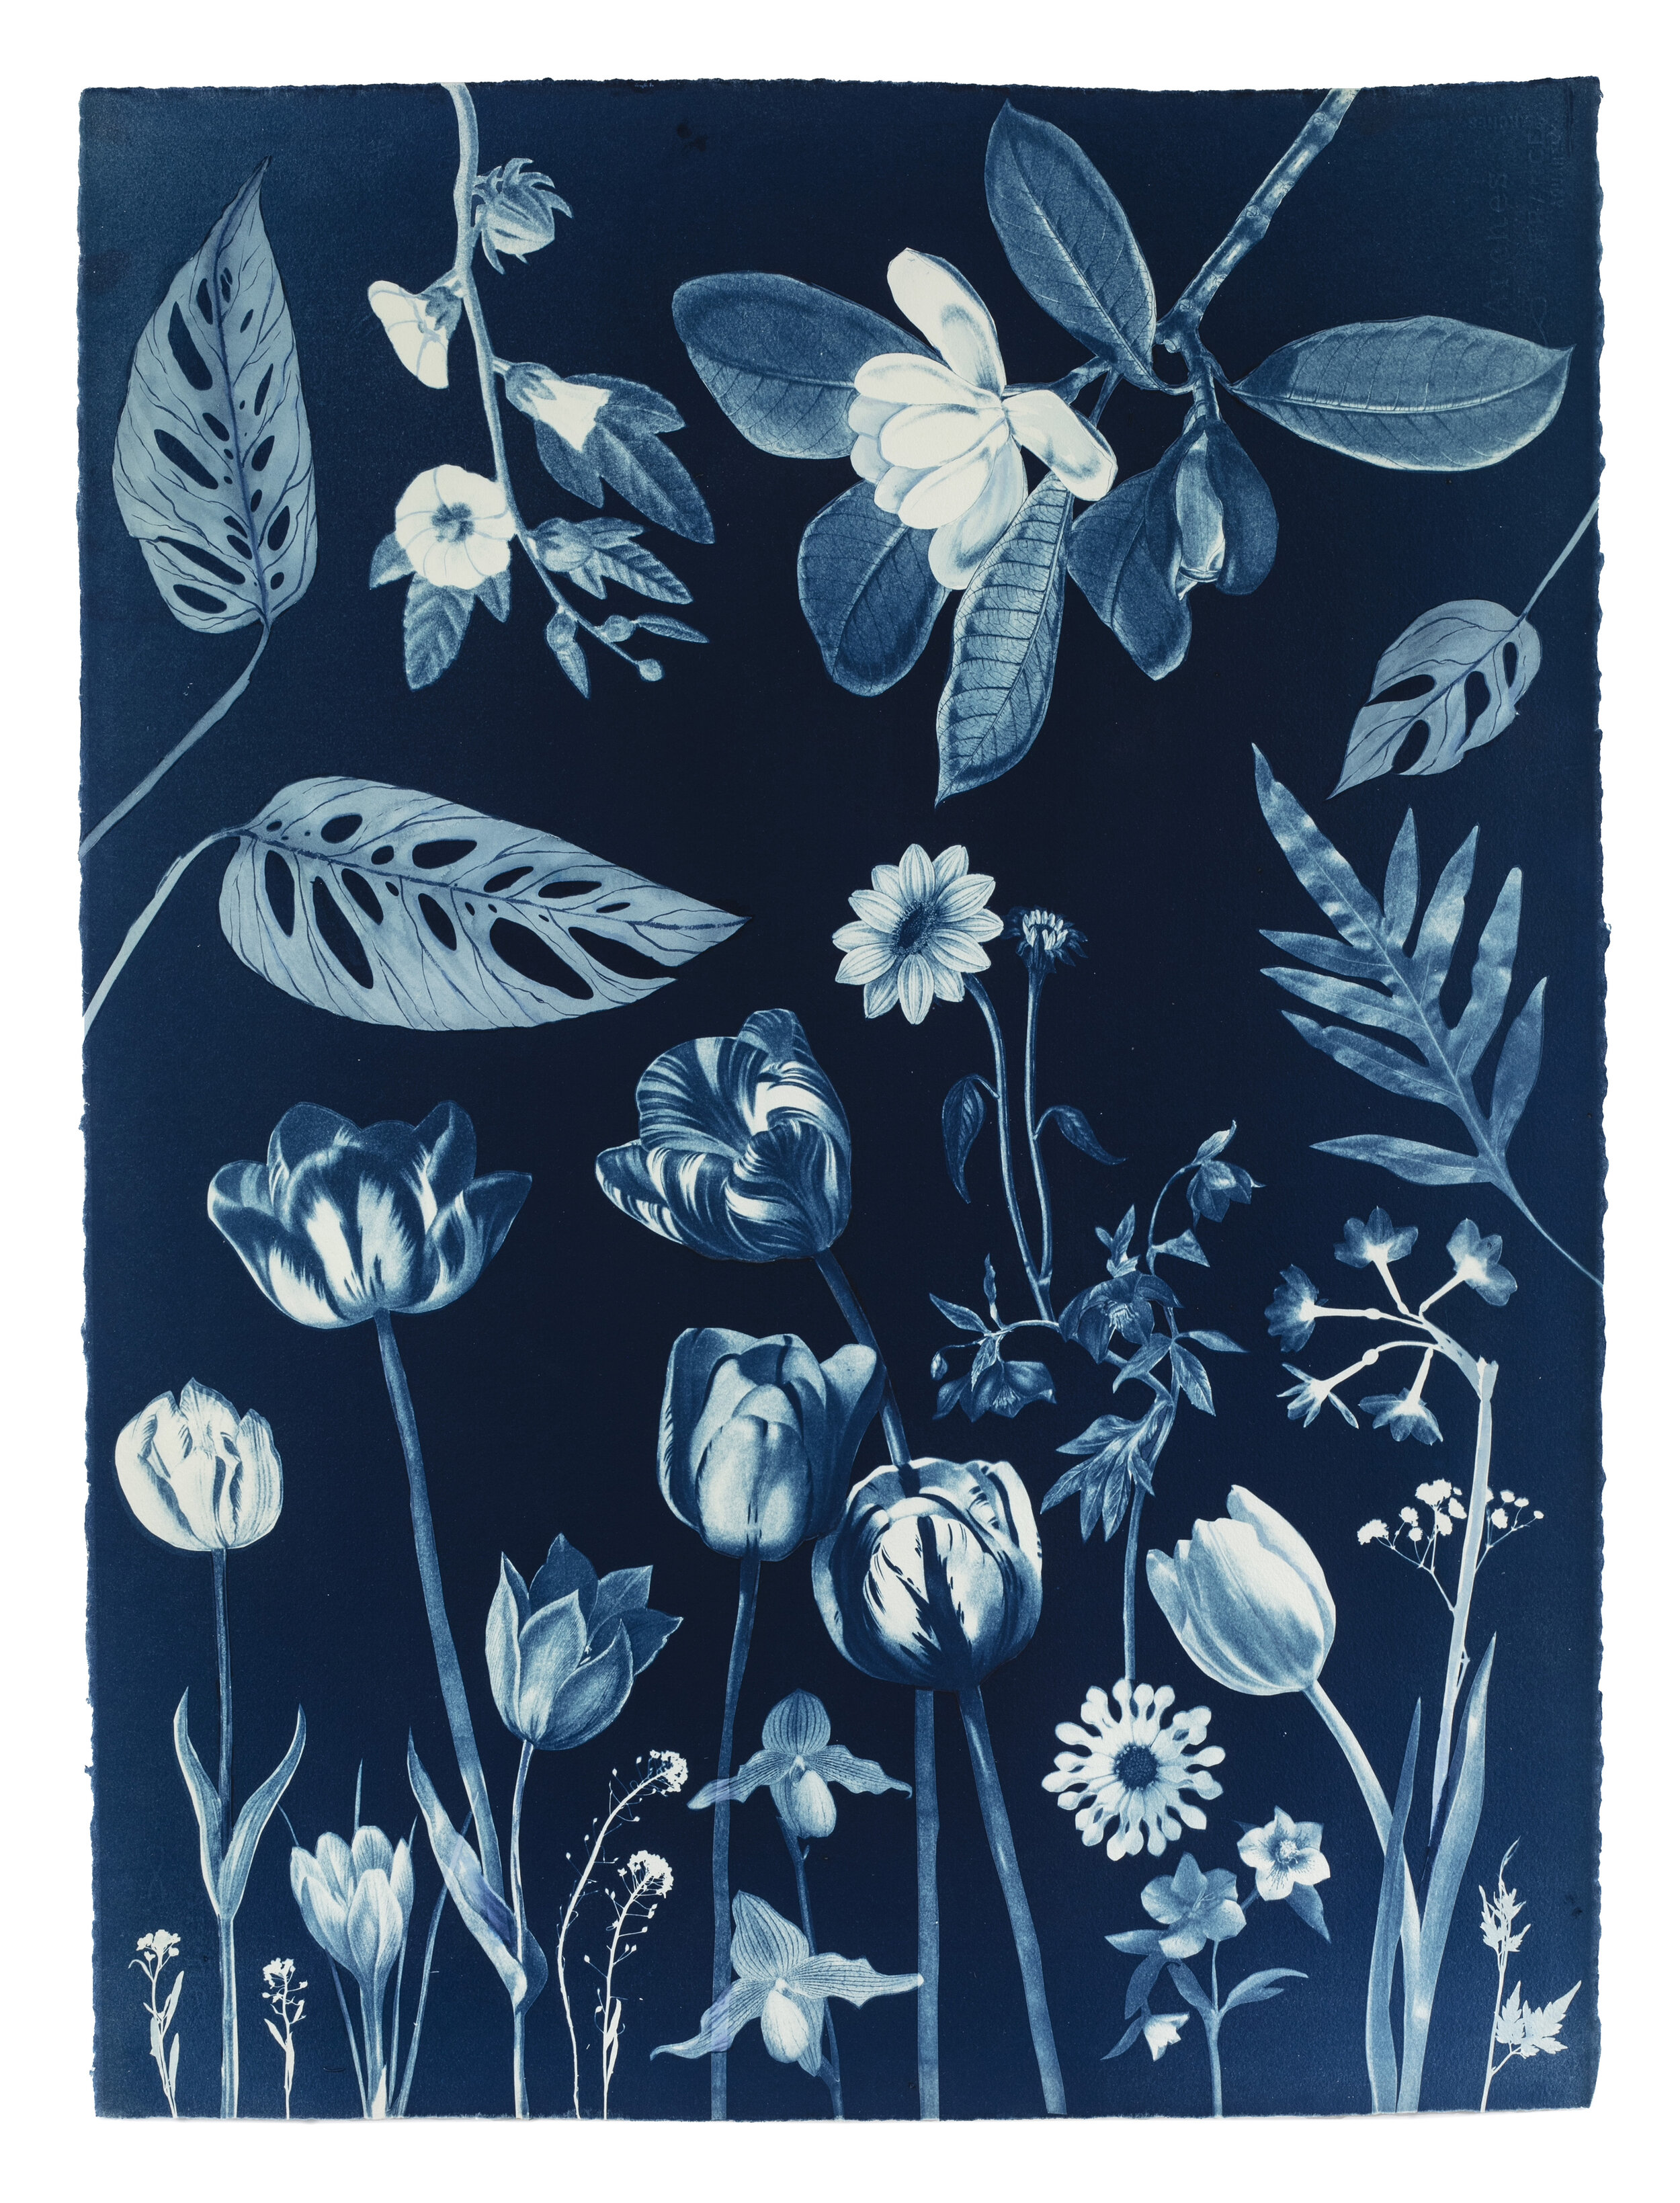 Cyanotype Painting (Magnolia, Tulips, Orchids, Leaves, Ferns, etc)